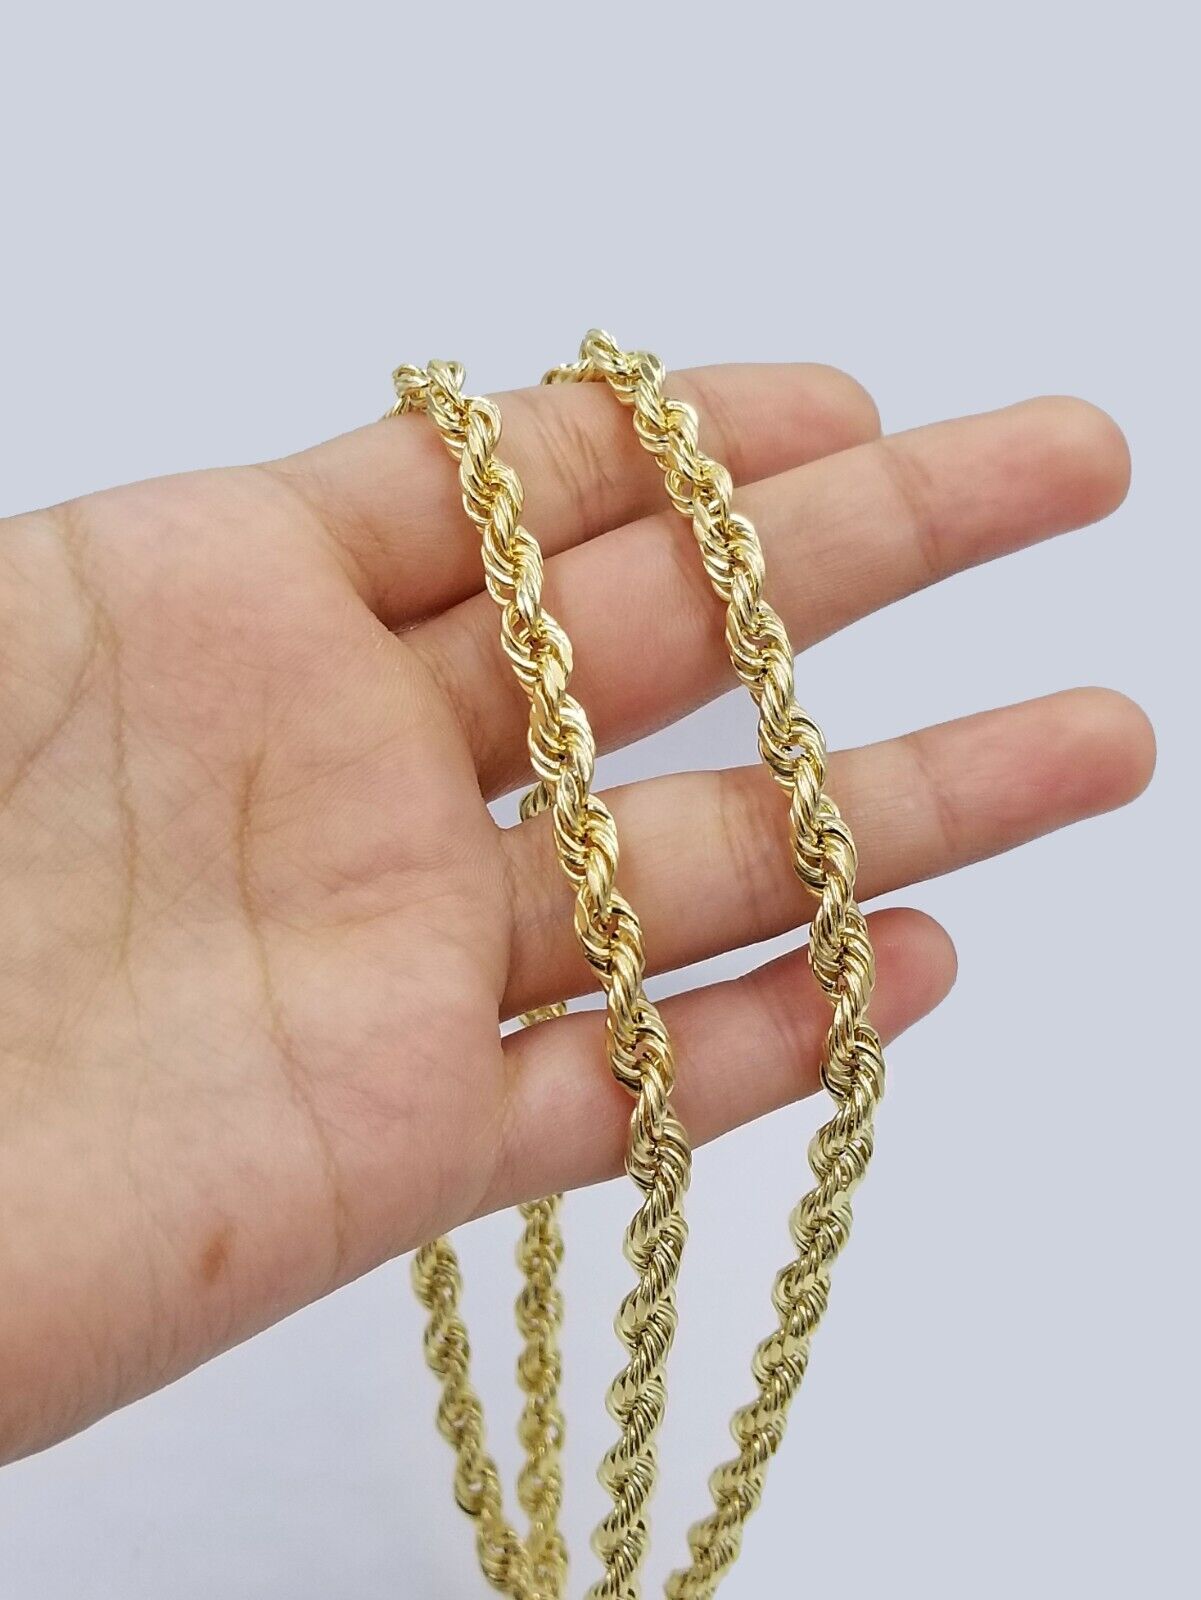 Real 14K Yellow Gold Necklace Rope Chain 6mm 26 inch 14kt Men's Chain for Charm